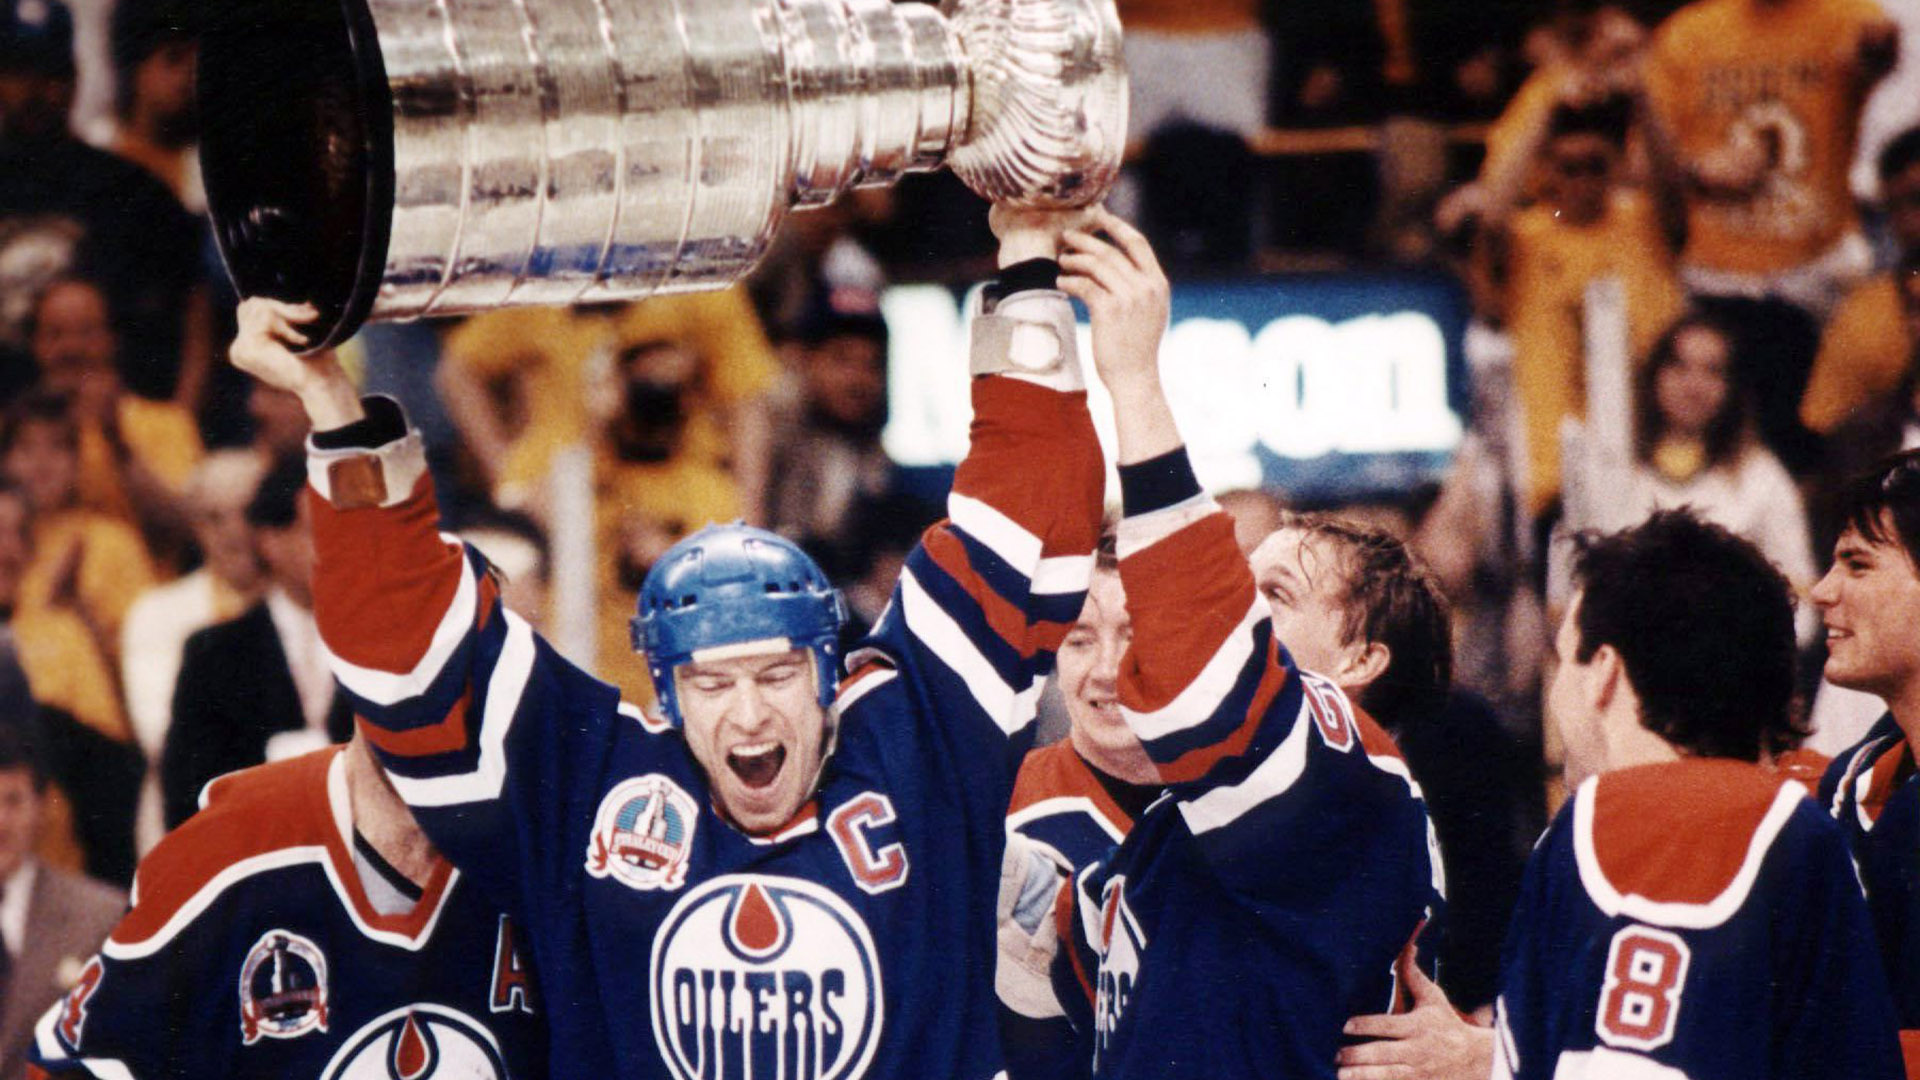 NHL99: Mark Messier was 'tough, strong and mean,' and impossible